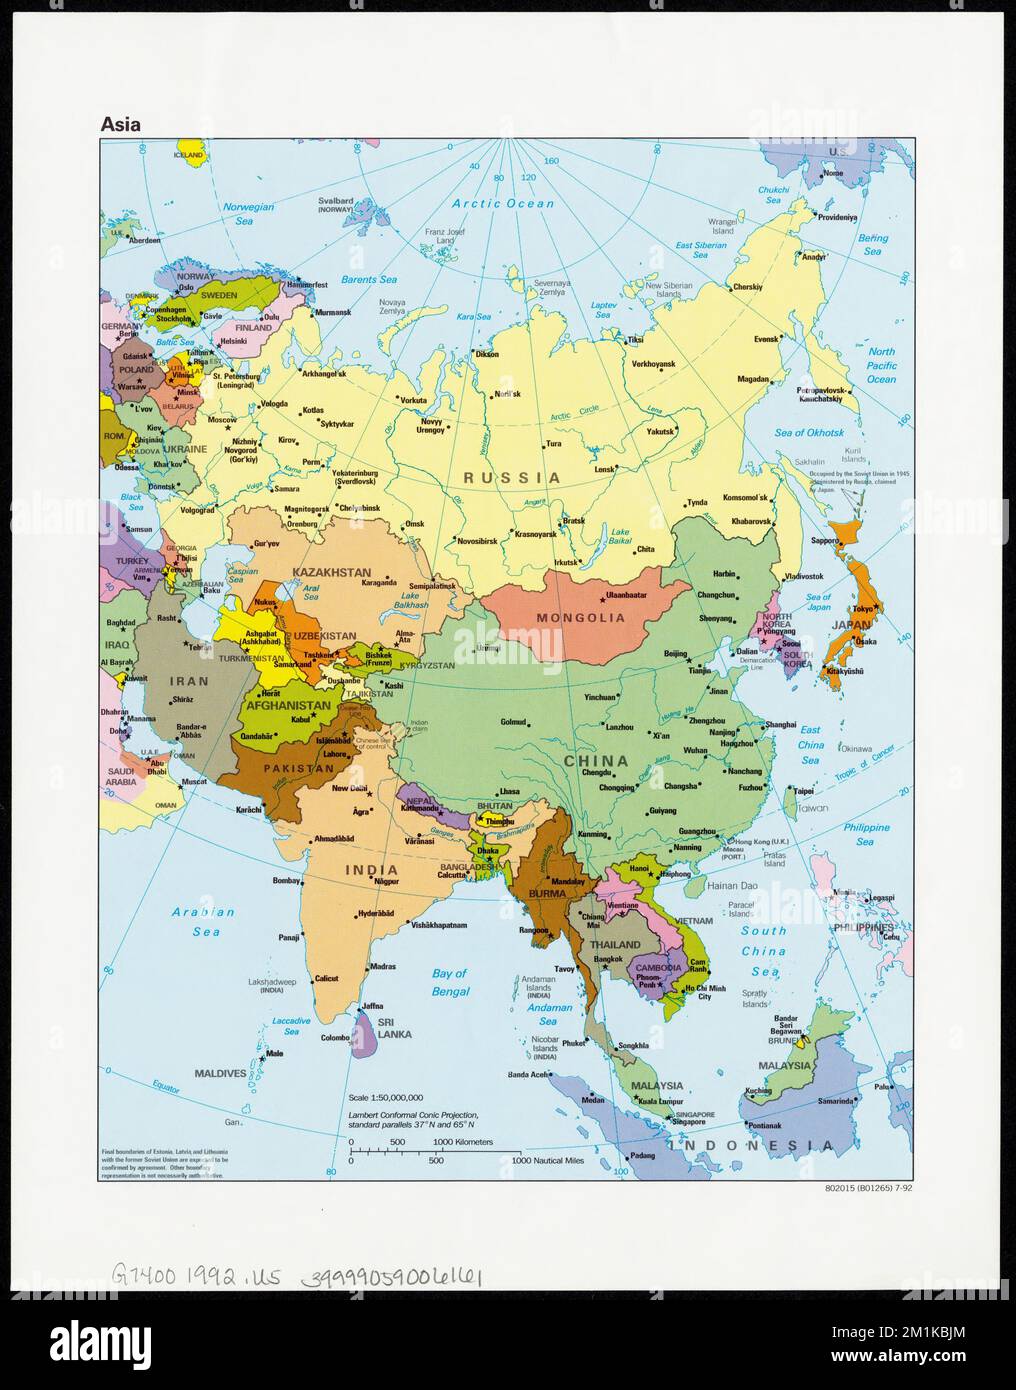 Asia , Asia, Maps, Eurasia, Maps Norman B. Leventhal Map Center ...